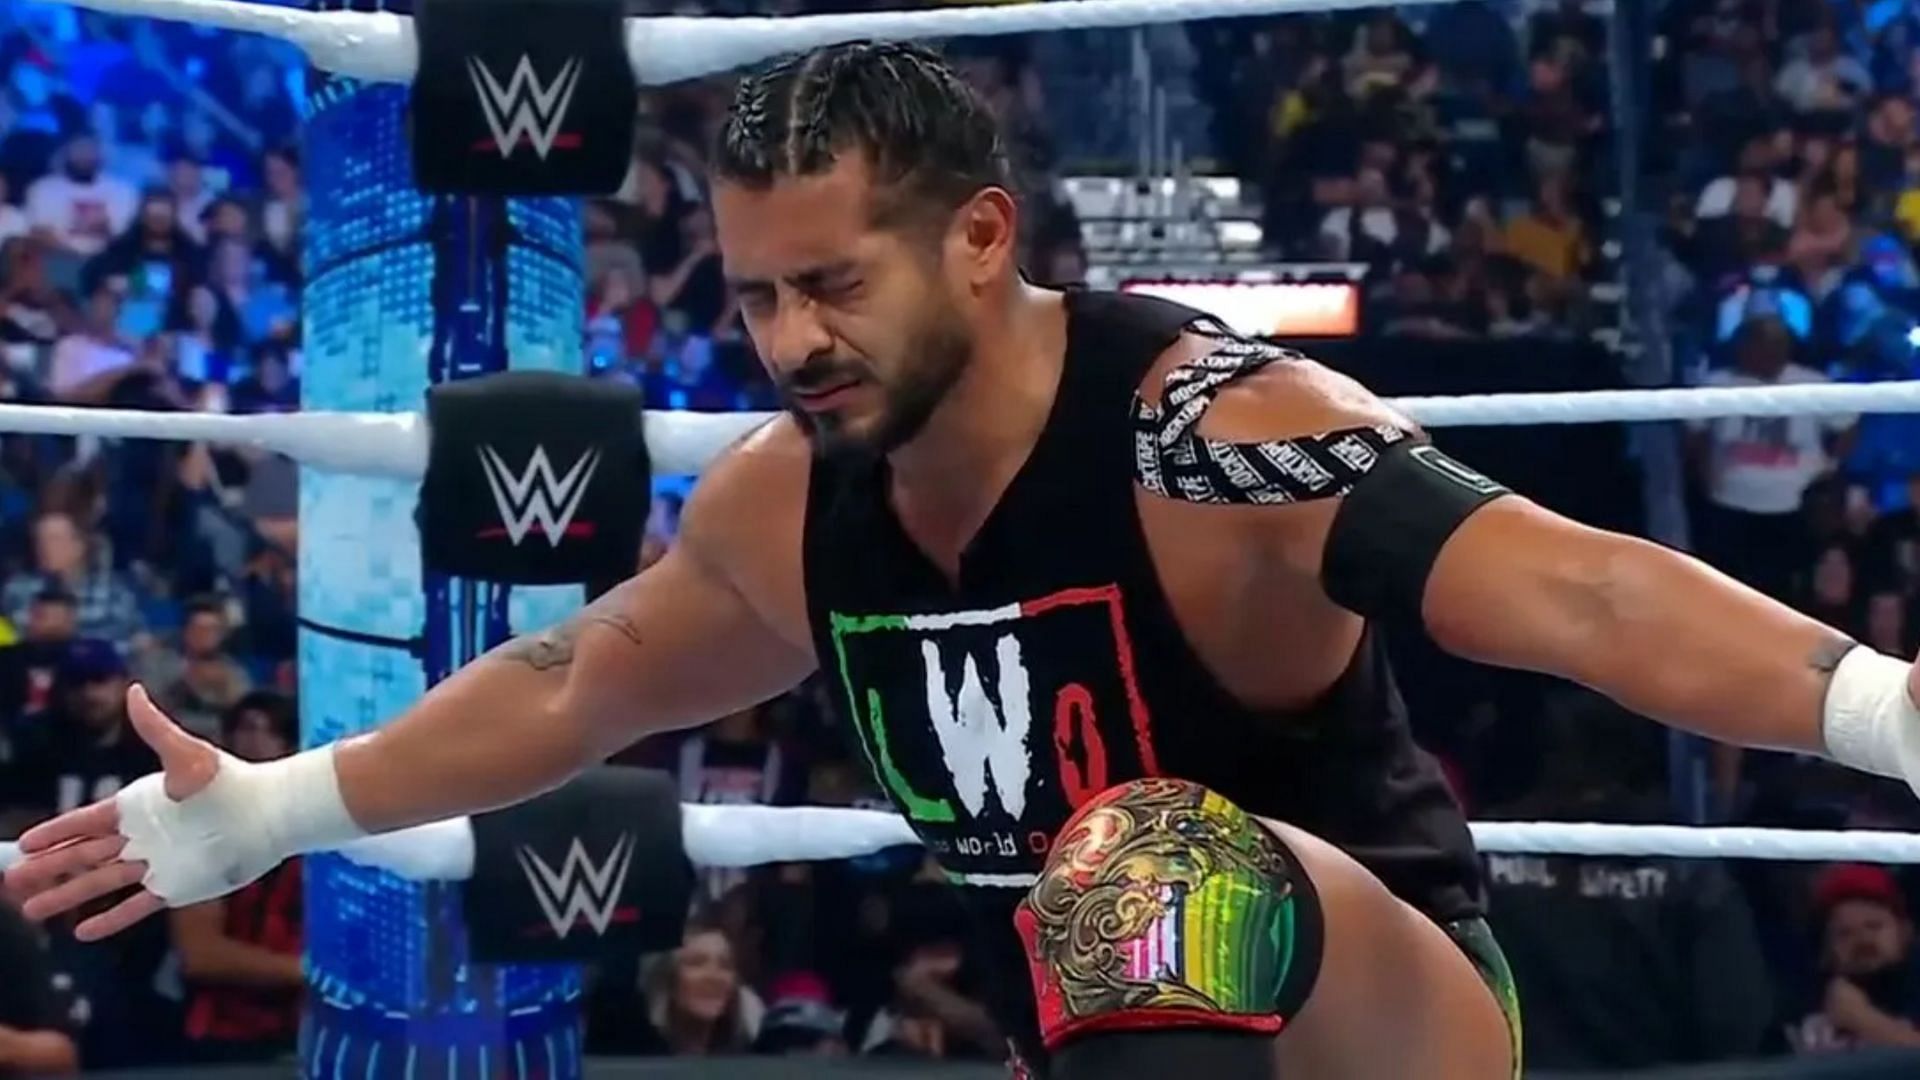 Santos Escobar is the number-one contender for the WWE Unites States Championship